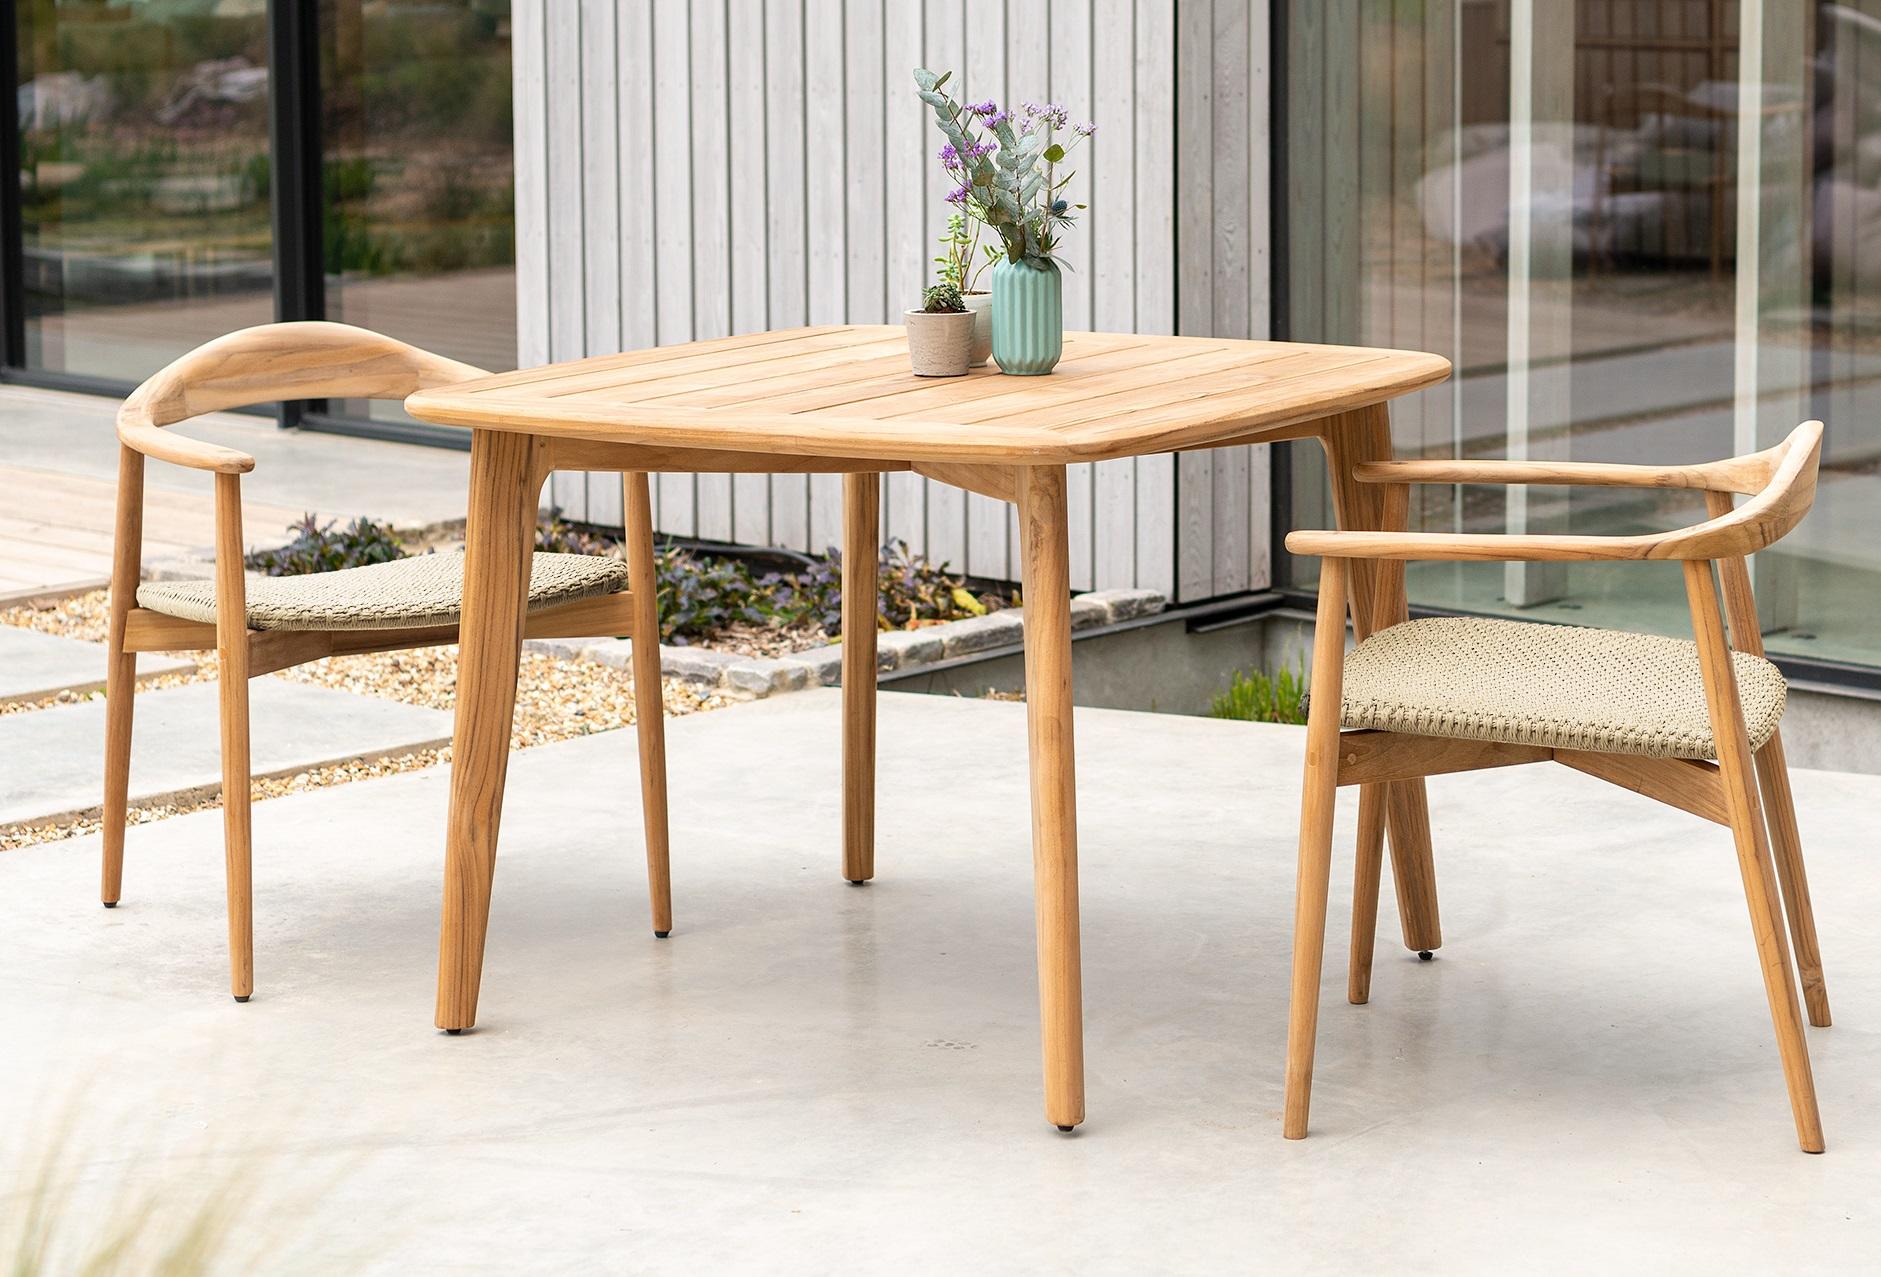 square compact teak garden dining table shown with 2 chairs